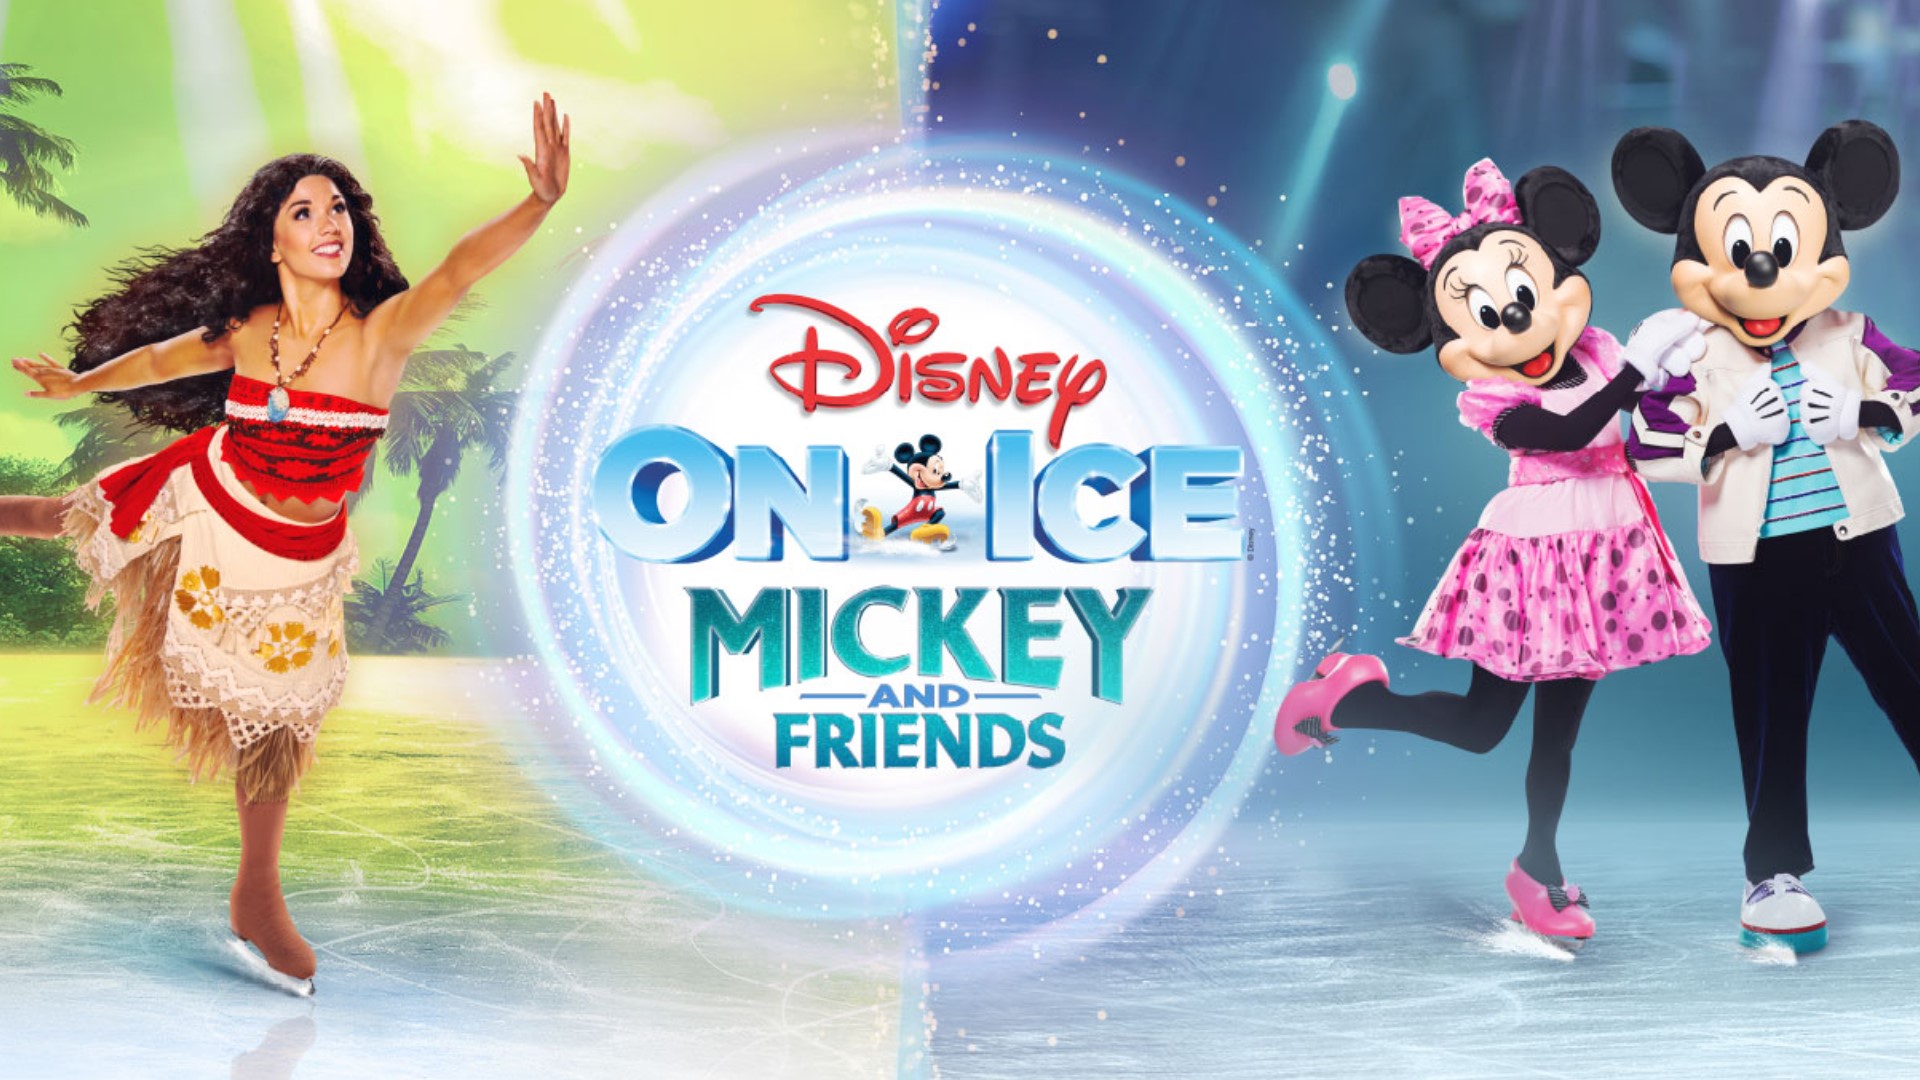 Mickey and Friends will skate into Nationwide Arena on Feb. 2, with performances set to run through Feb. 6.